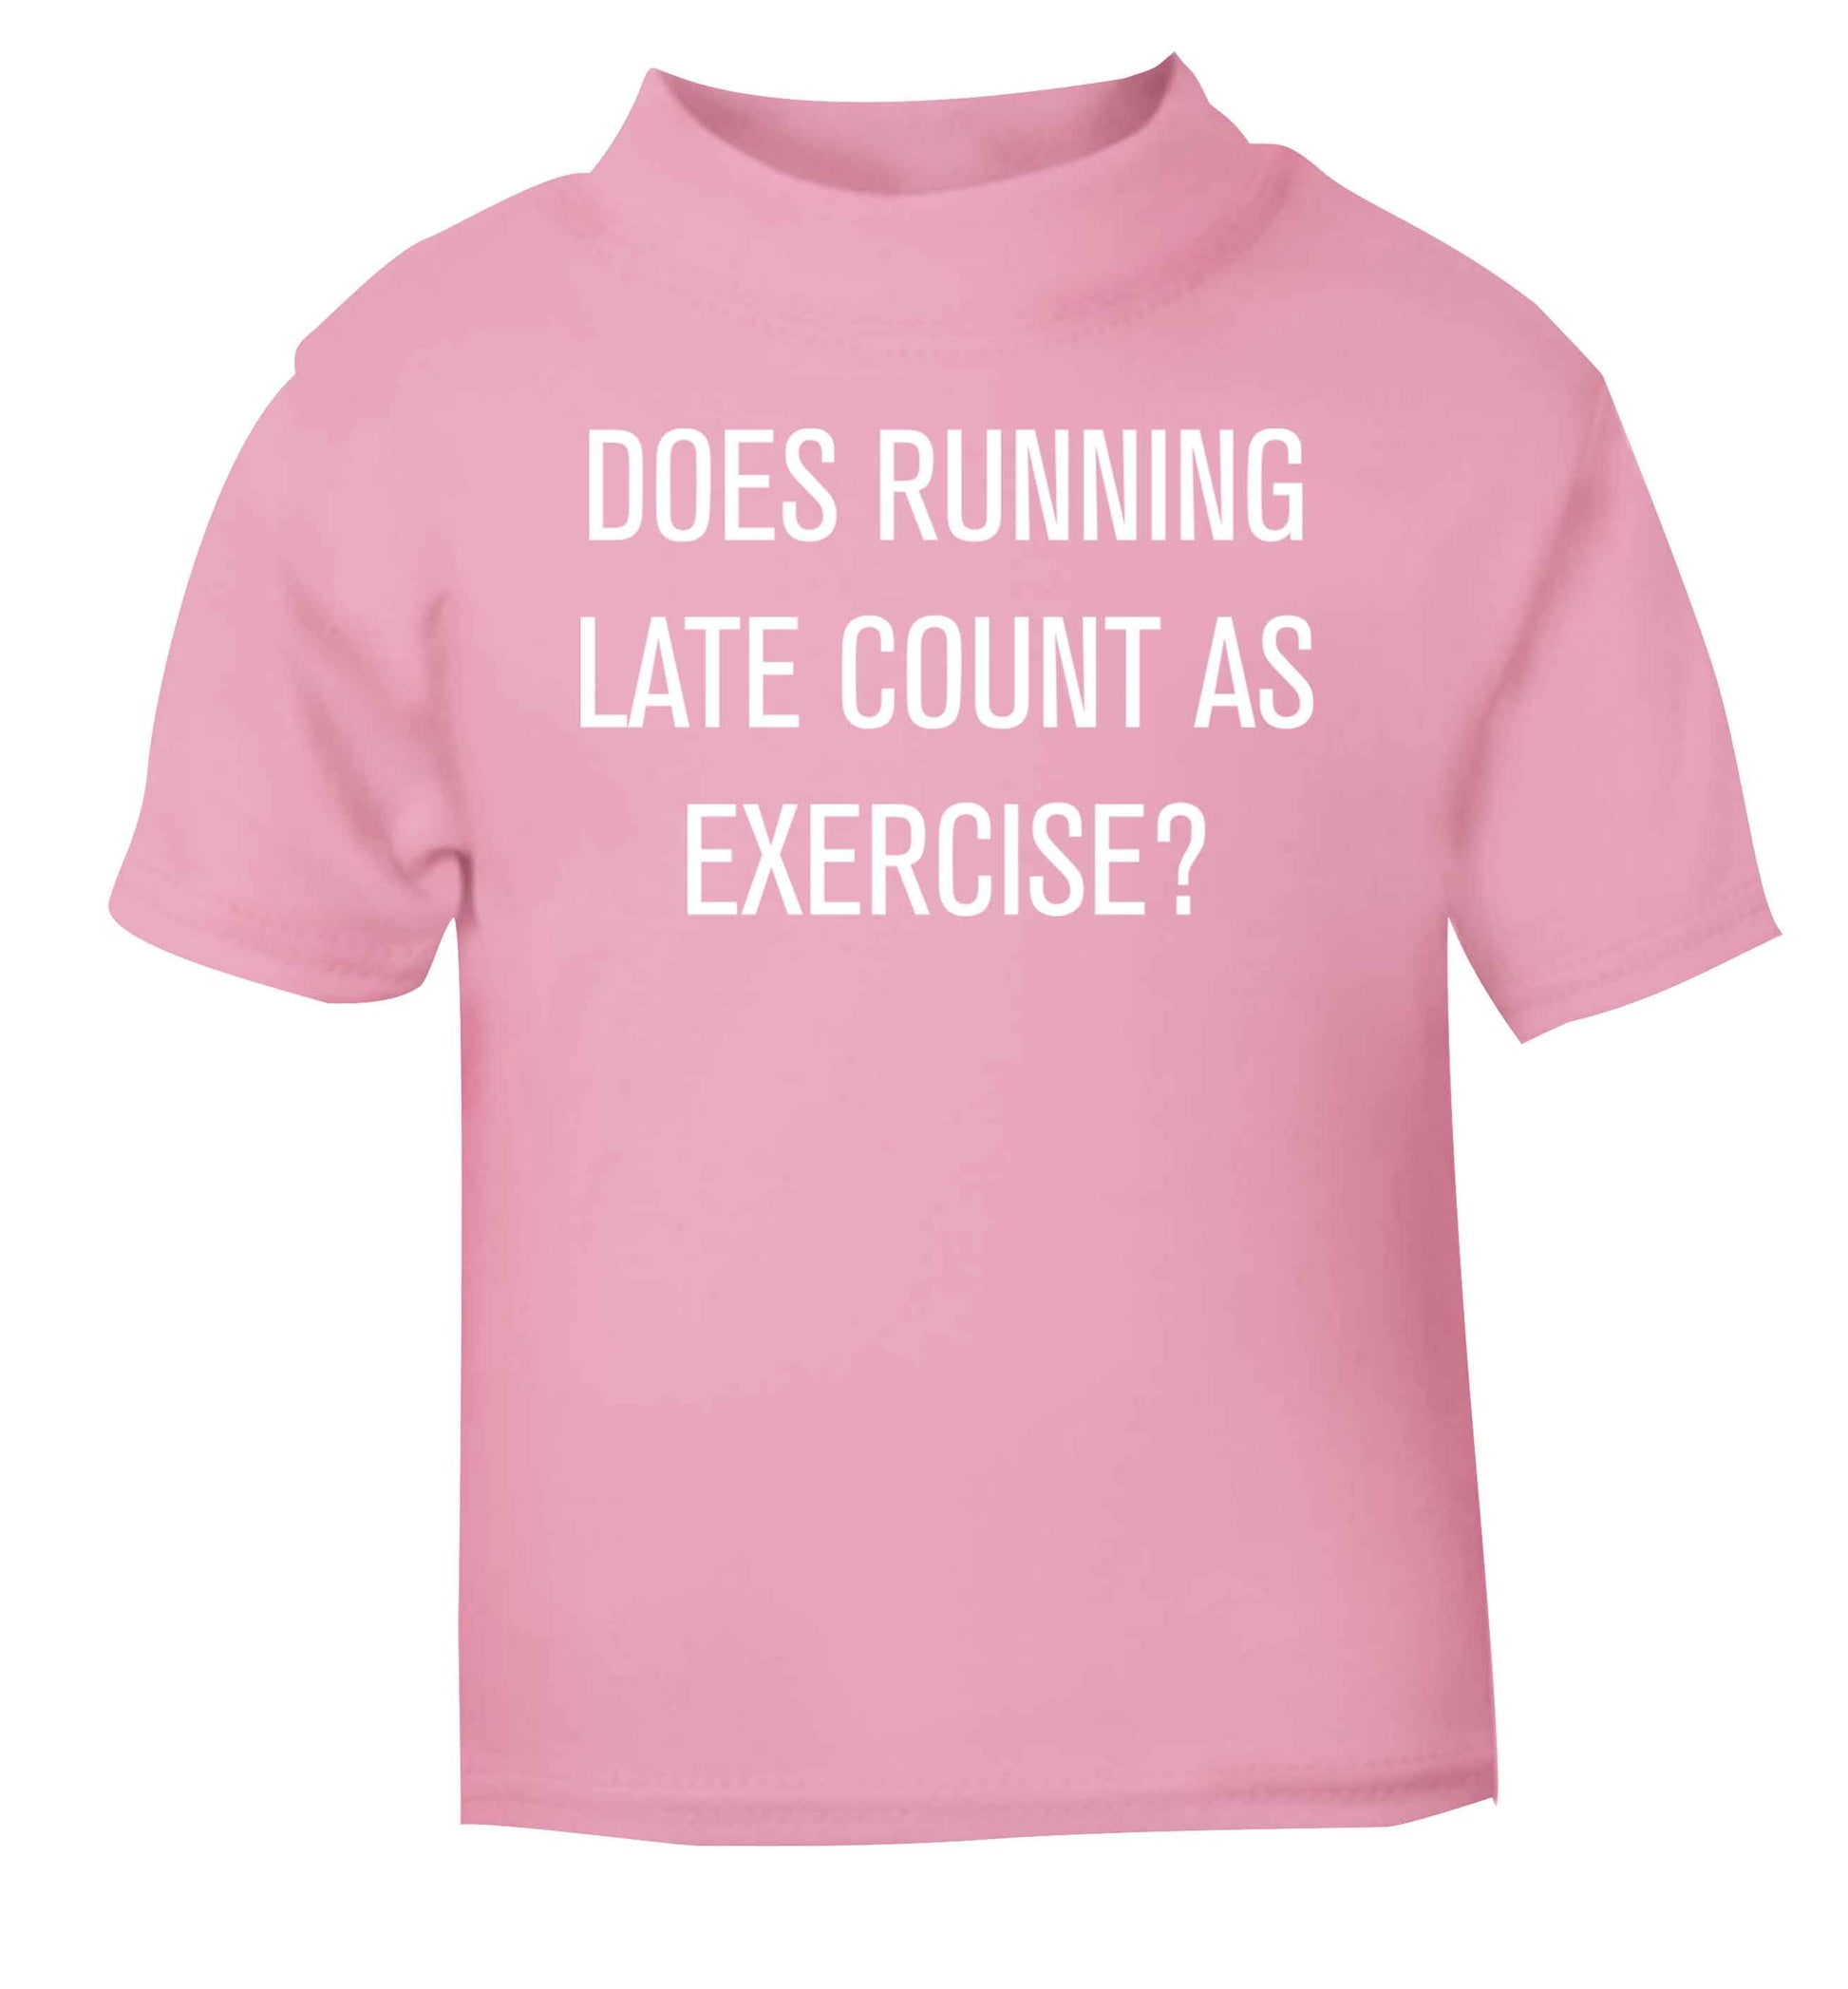 Does running late count as exercise? light pink baby toddler Tshirt 2 Years